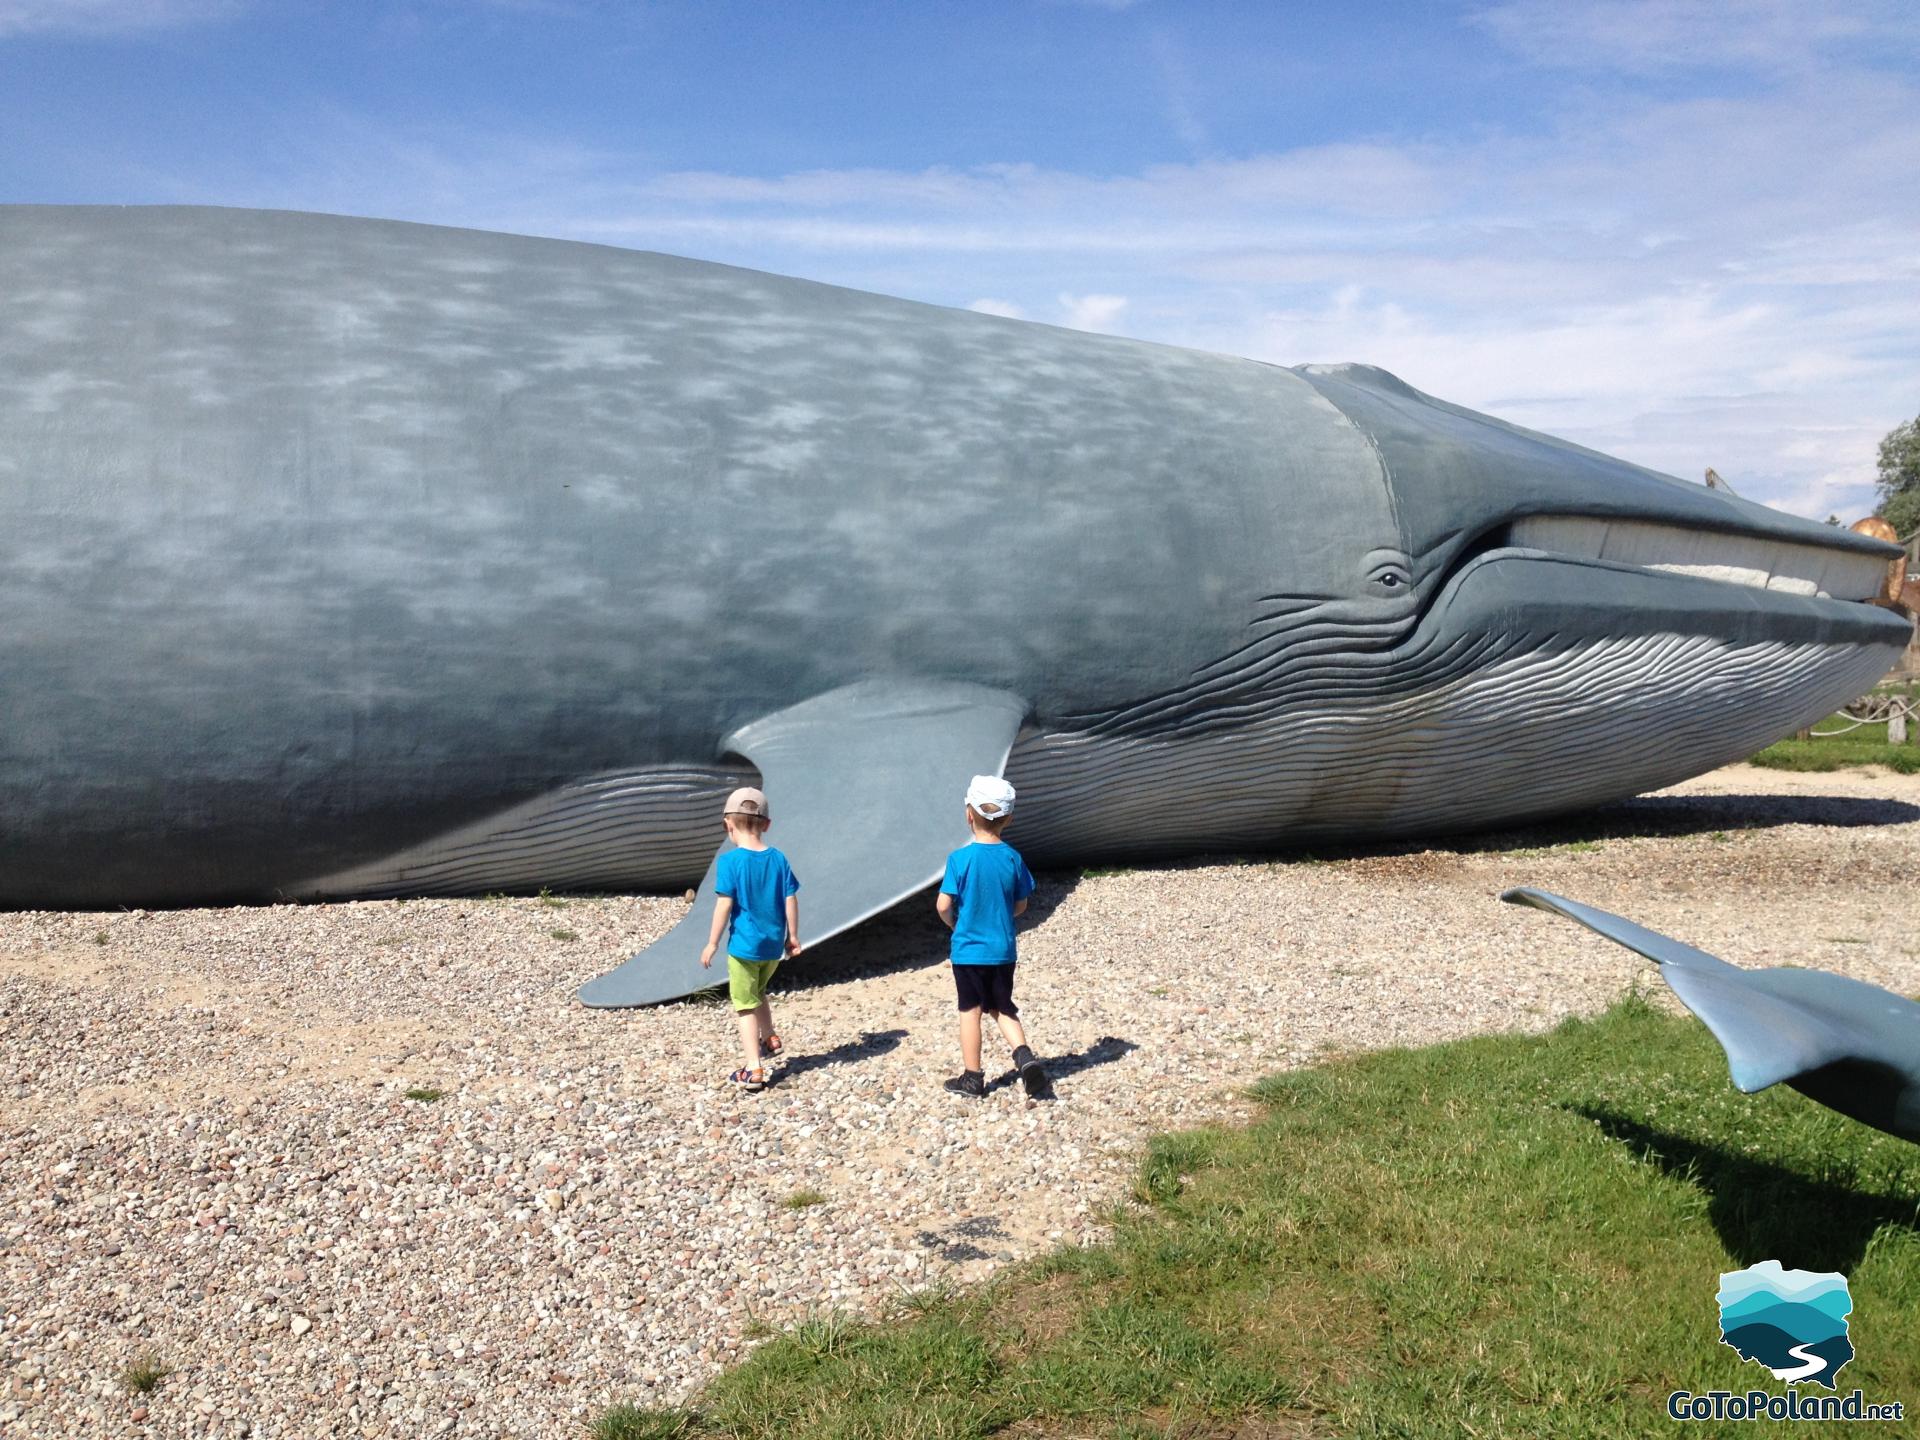 large whale model and two boys next to it